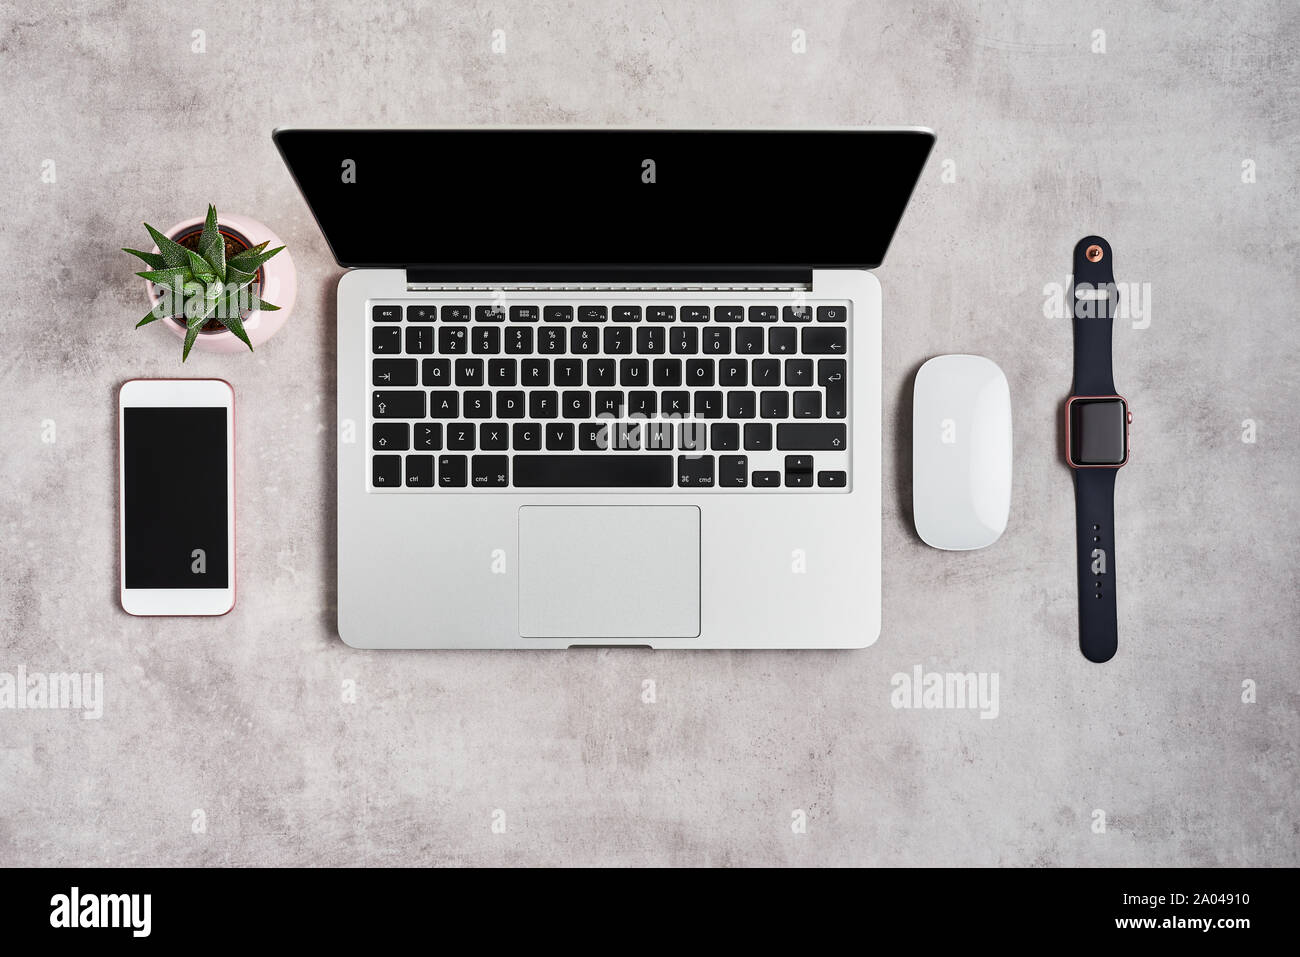 Open laptop with white mouse, smartphone, smartwatch and plant on grey concrete background. Top view with copy space for text. Flat lay photo of offic Stock Photo